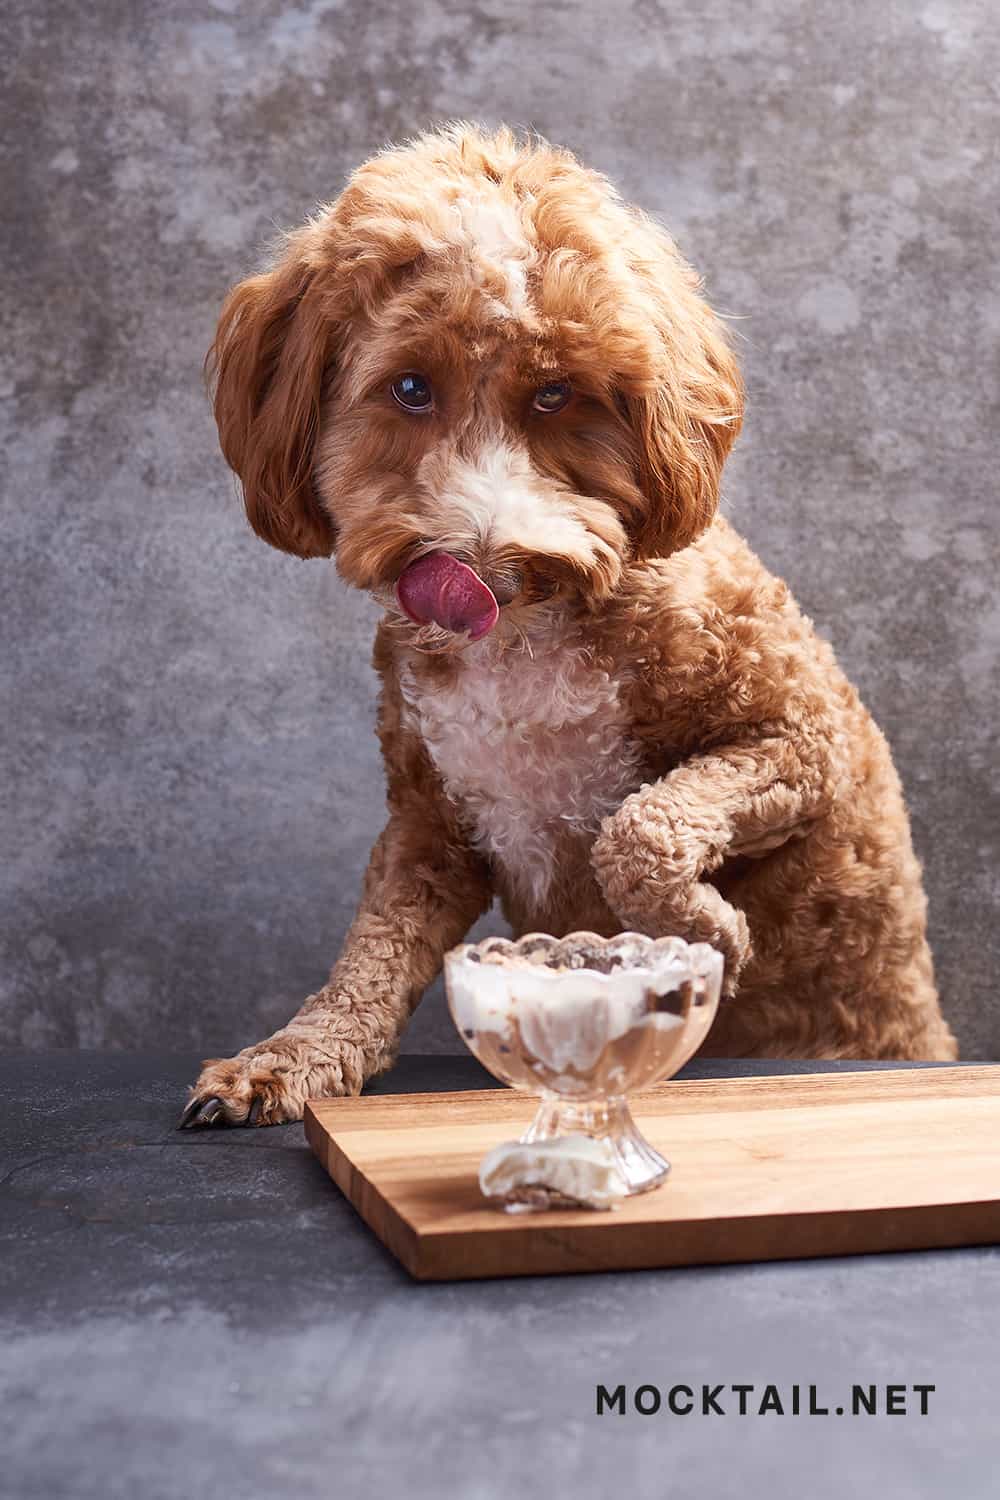 What is in a Puppuccino for dogs?